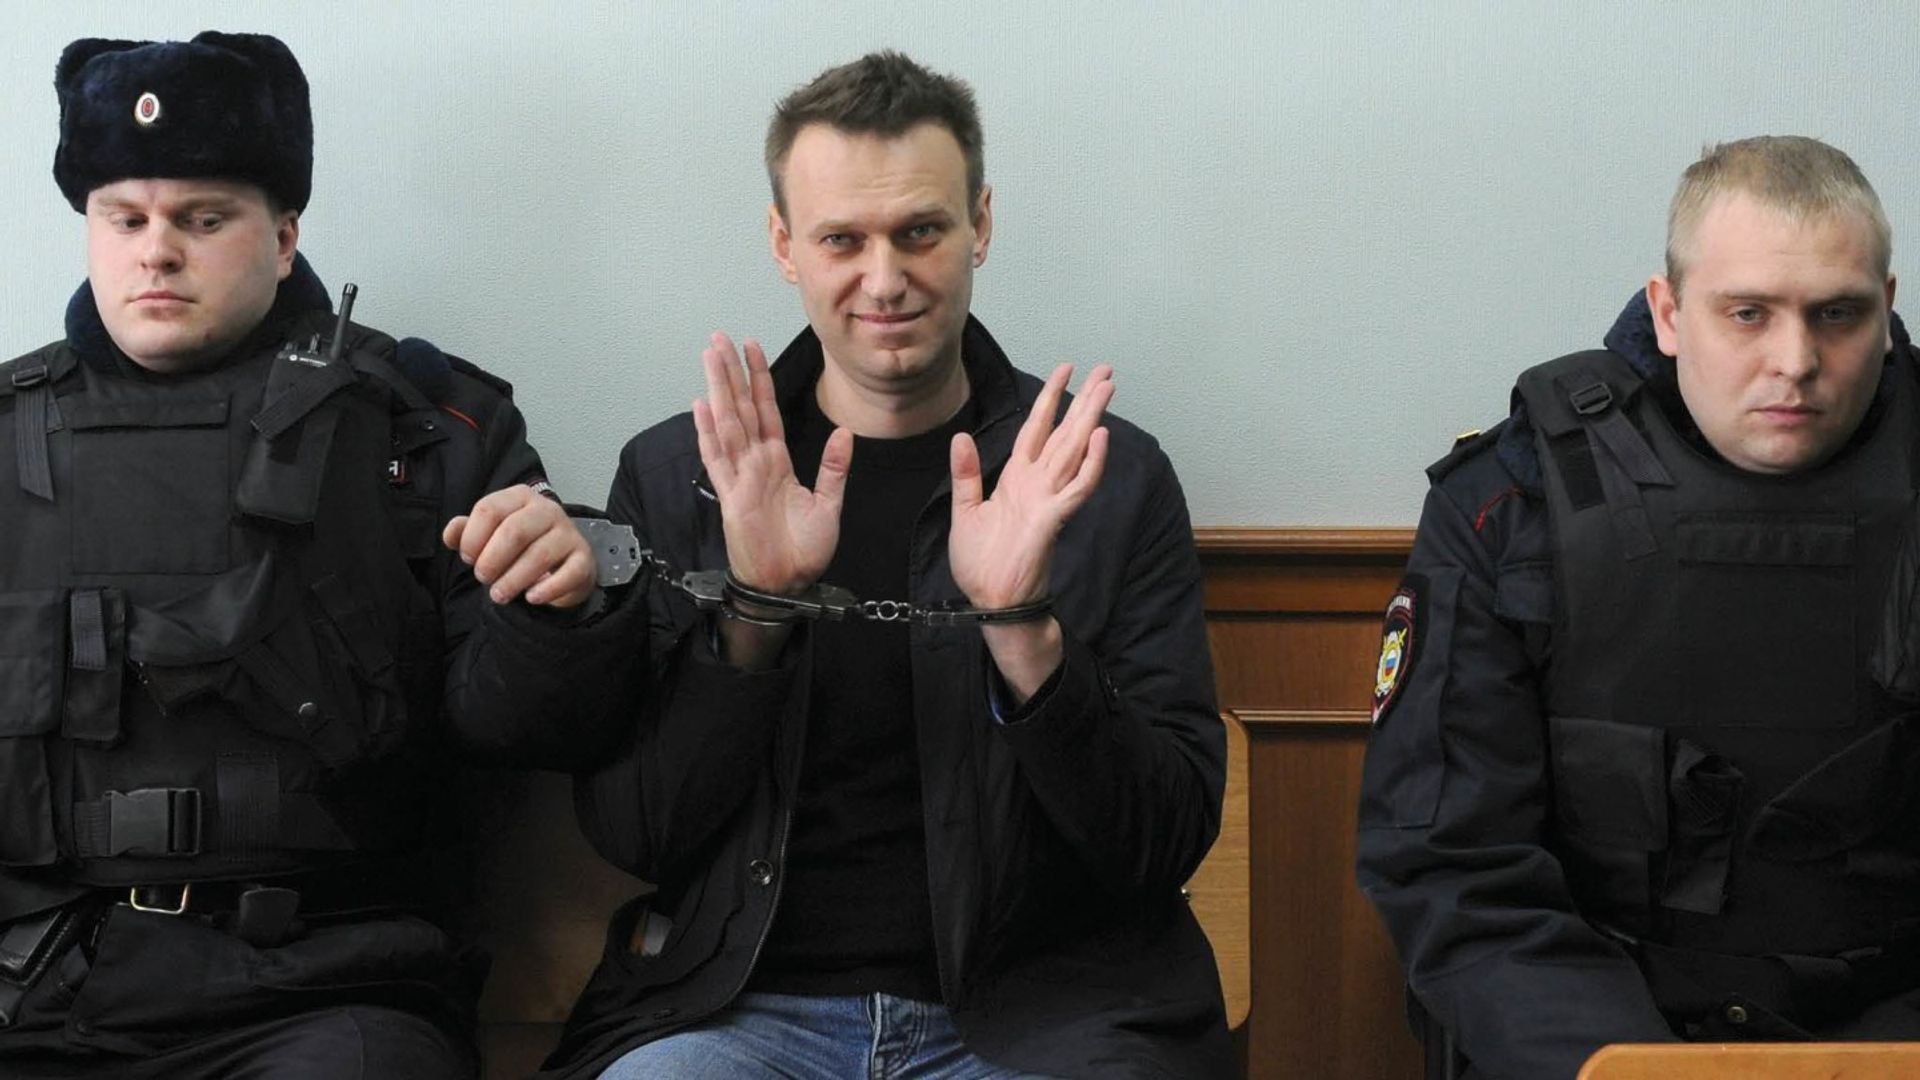 Alexey before the prison